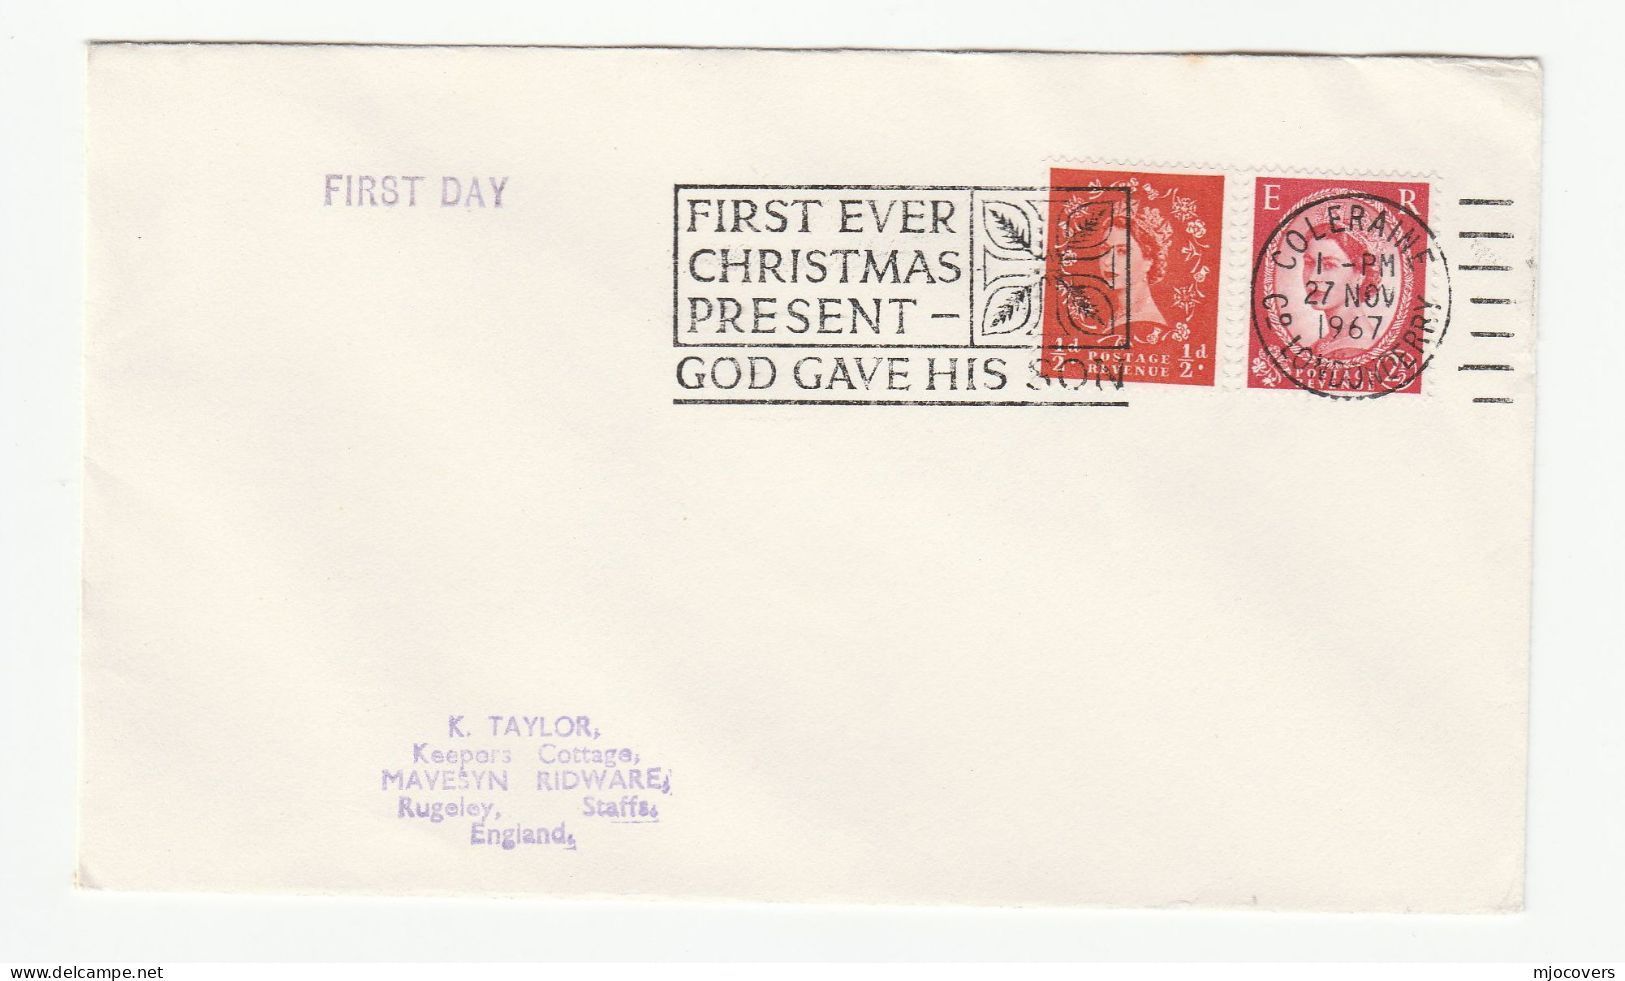 Religion 1967  Cover Coleraine FIRST EVER CHRISTMAS PRESENT GOD GAVE HIS SON Illus CROSS SLOGAN  Gb Stamps - Covers & Documents